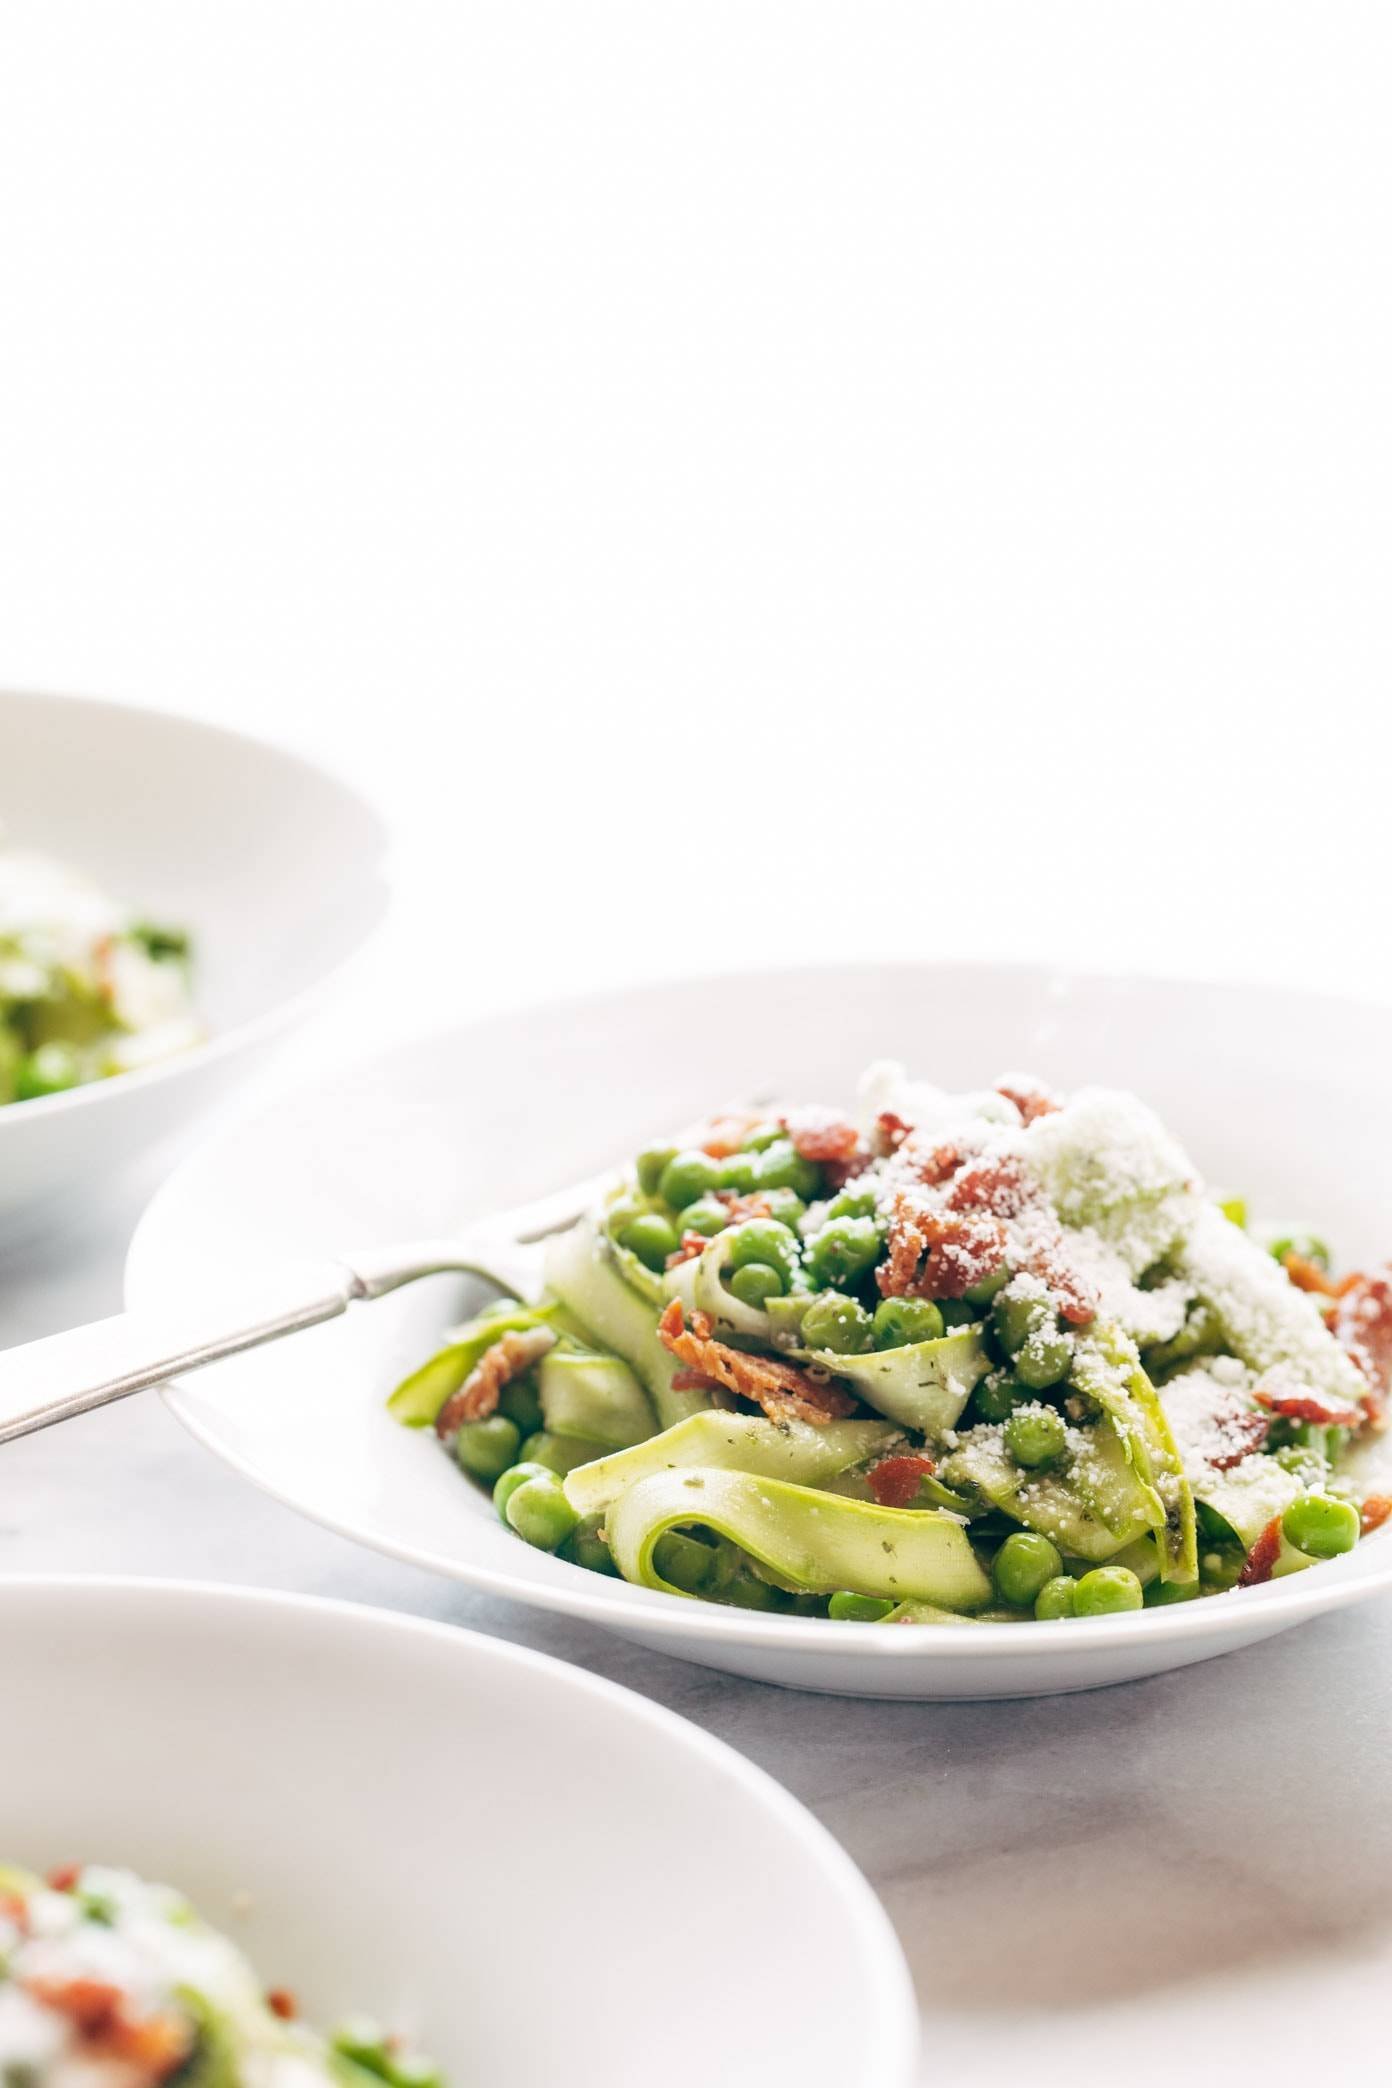 Asparagus Noodles with Pesto in a bowl with a fork.